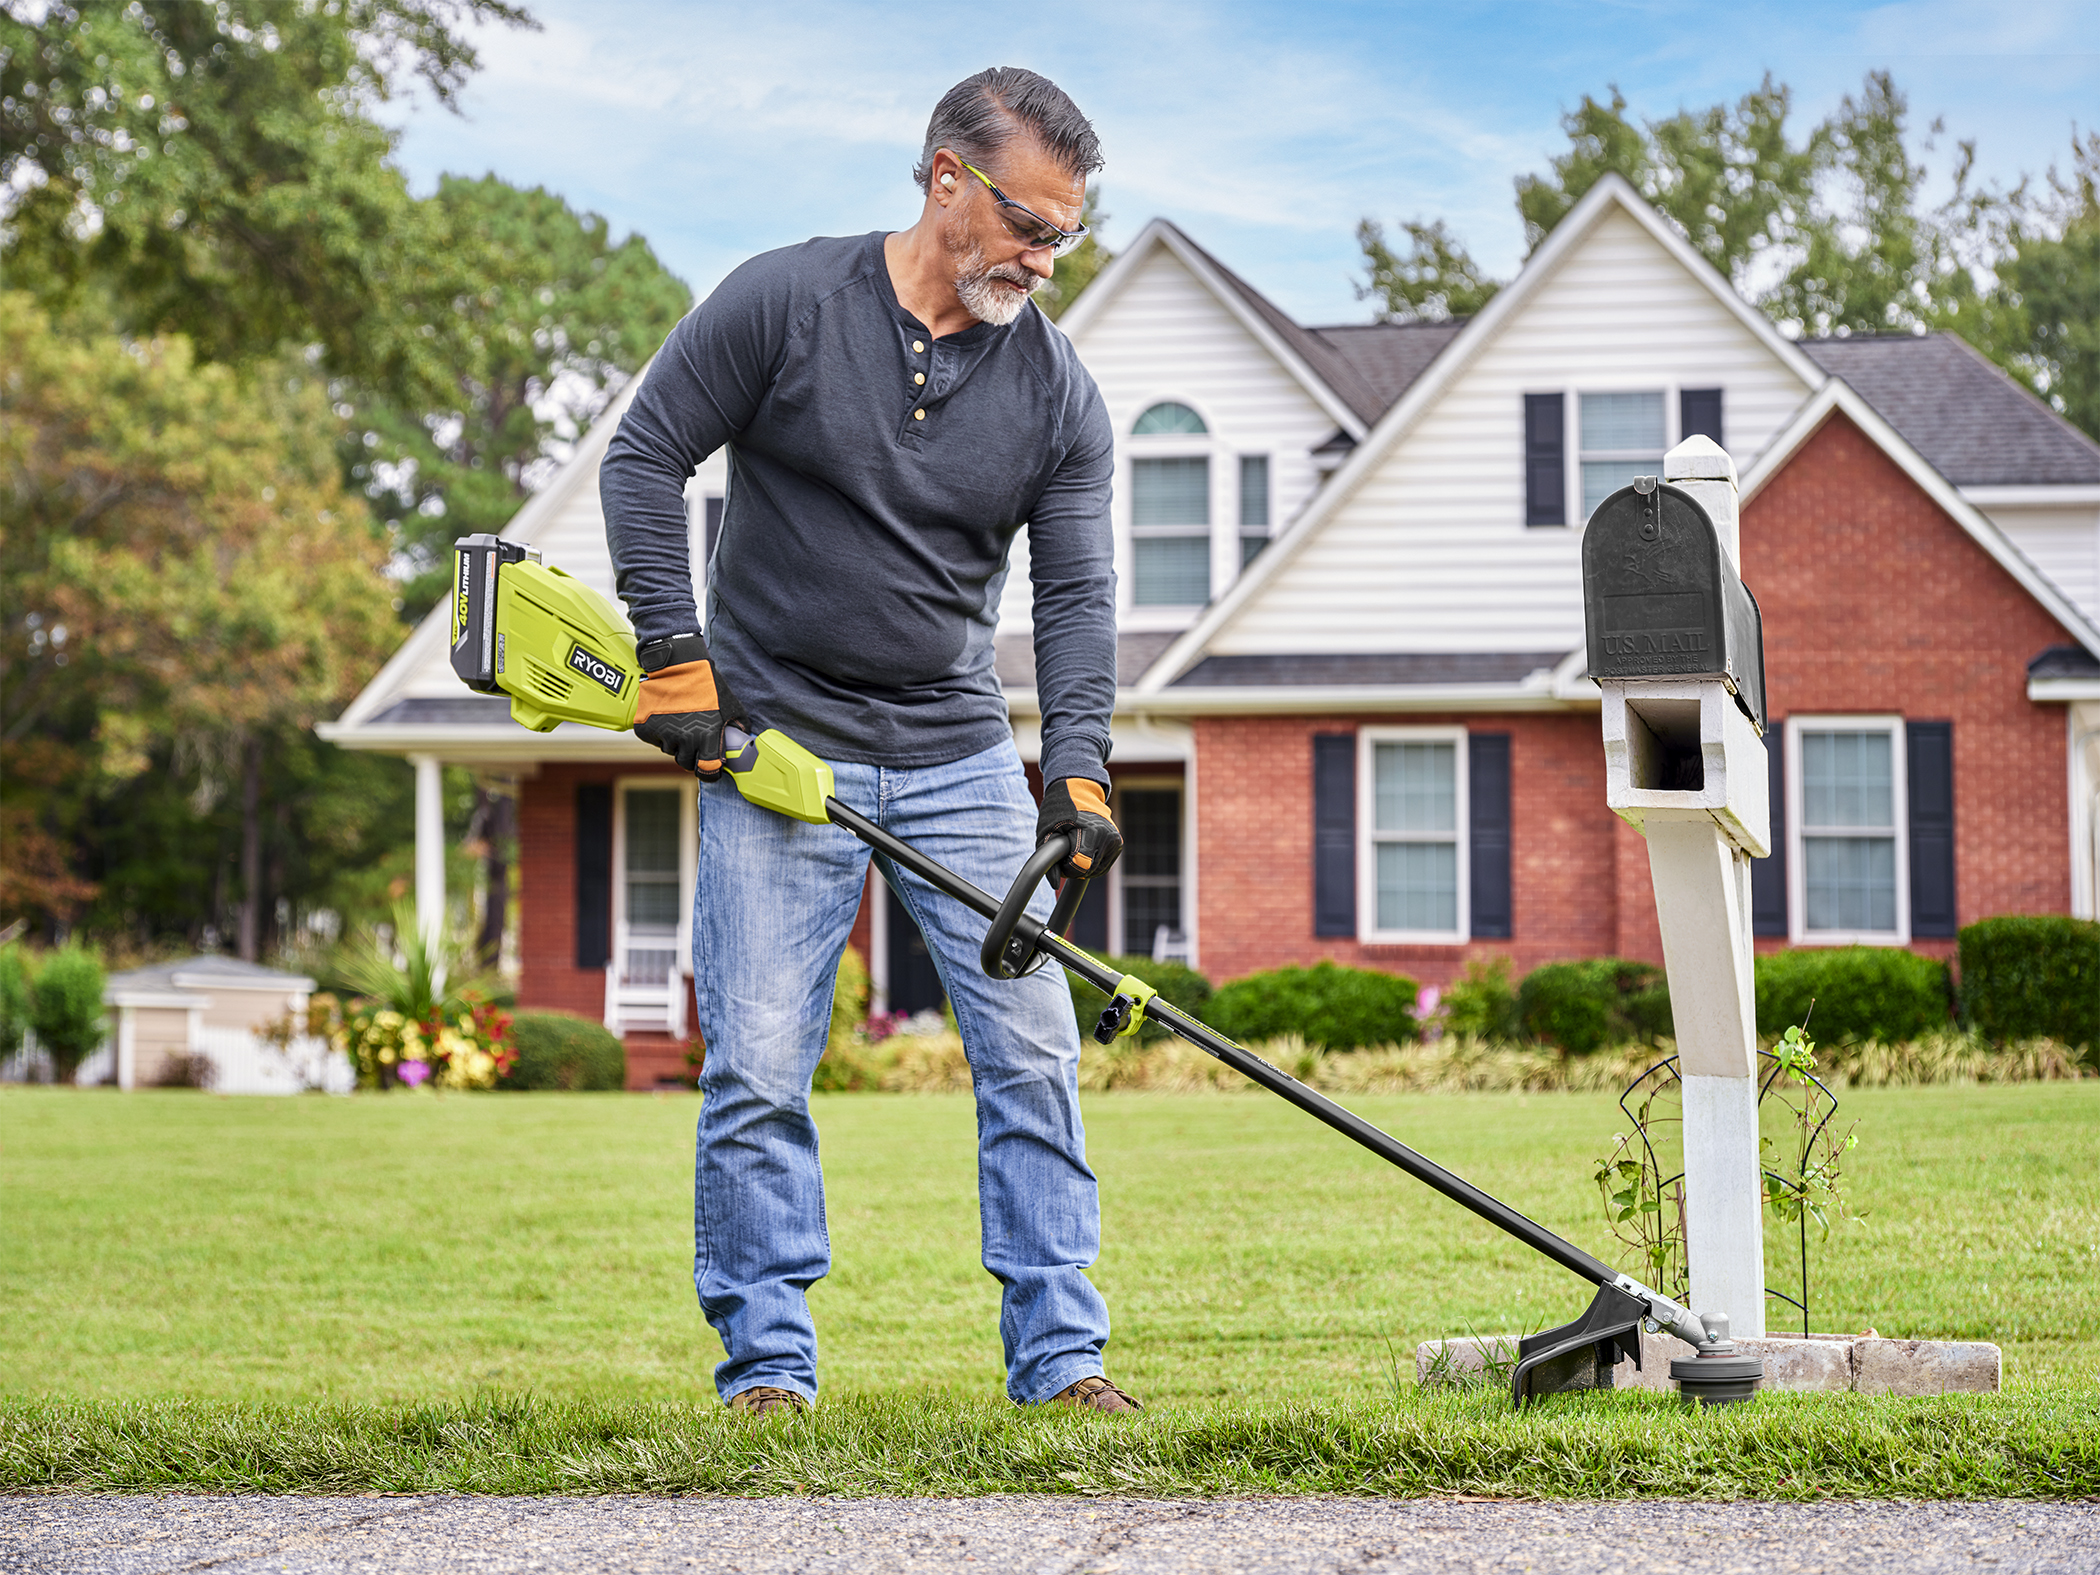 Achieve 1 Hour of Runtime With the String Trimmer